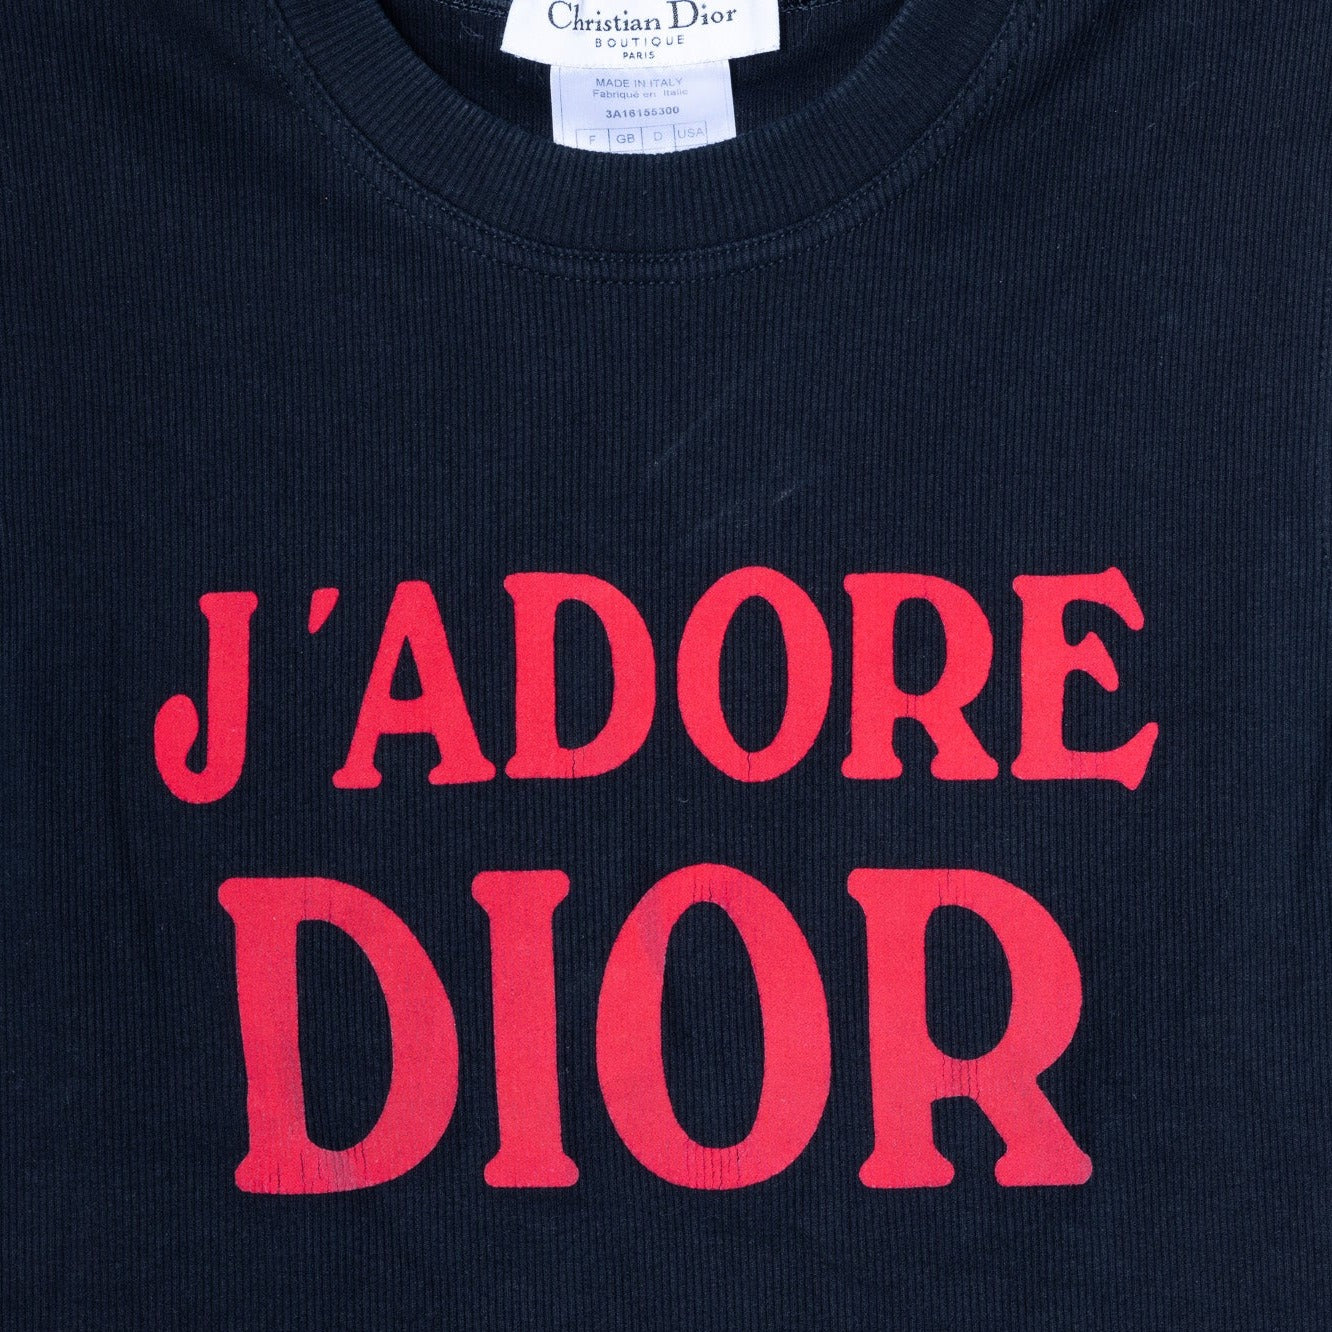 J'adore Dior World Champion 1947 Top - Embrace iconic elegance and elevate your style with this timeless fashion piece.